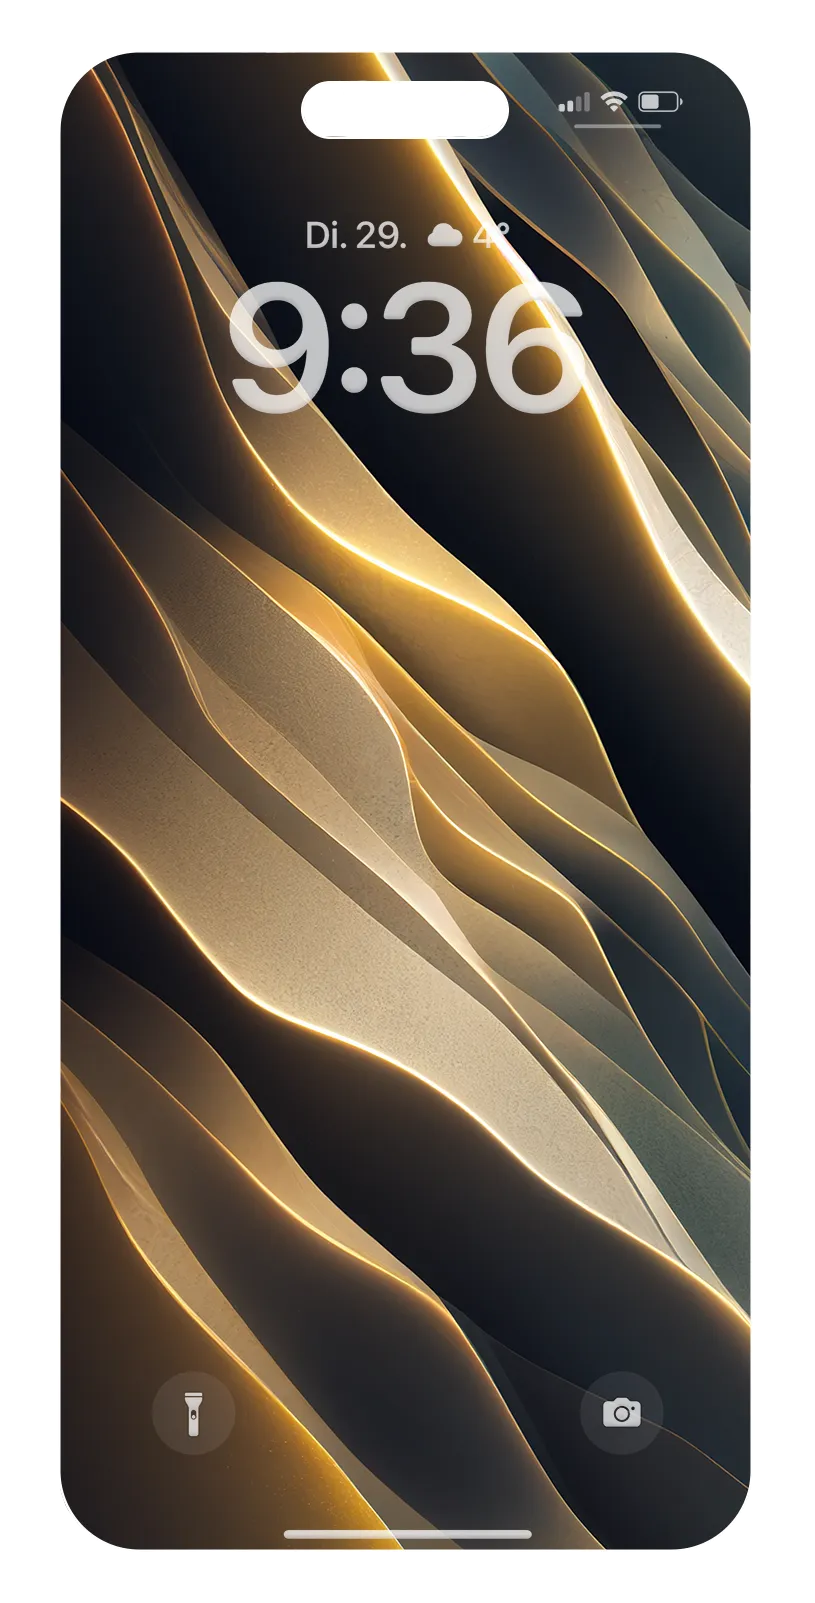 The best free high resolution 4k luxury background collections for Iphone 14 pro Max, Iphone 14 pro, iPhone 14 Plus, iPhone SE,
iPhone 13 Pro Max, iPhone 13 Pro, iPhone 13 and free wallpapers for Android, Samsung Galaxy S22 Ultra, Samsung Galaxy S22+.
Google Pixel 7 Pro.
Oppo Find X5 Pro.
Google Pixel 7.
Honor Magic4 Pro 5G.
Xiaomi 12T Pro.
Xiaomi 12T 5G.
3d-illustration, abstract, art, artistic, background, beautiful, beauty, blue, bright, brochure, brush, canvas, closeup, color, colorful, creative, decoration, design, drawing, dye, graphic, green, grunge, hot, illustration, image, ink, light, luxury, macro, material, paint, paper, pattern, poster, purple, red, shape, shiny, stain, style, surface, texture, textured, ultraviolet, wallpaper, water, watercolor, web, white